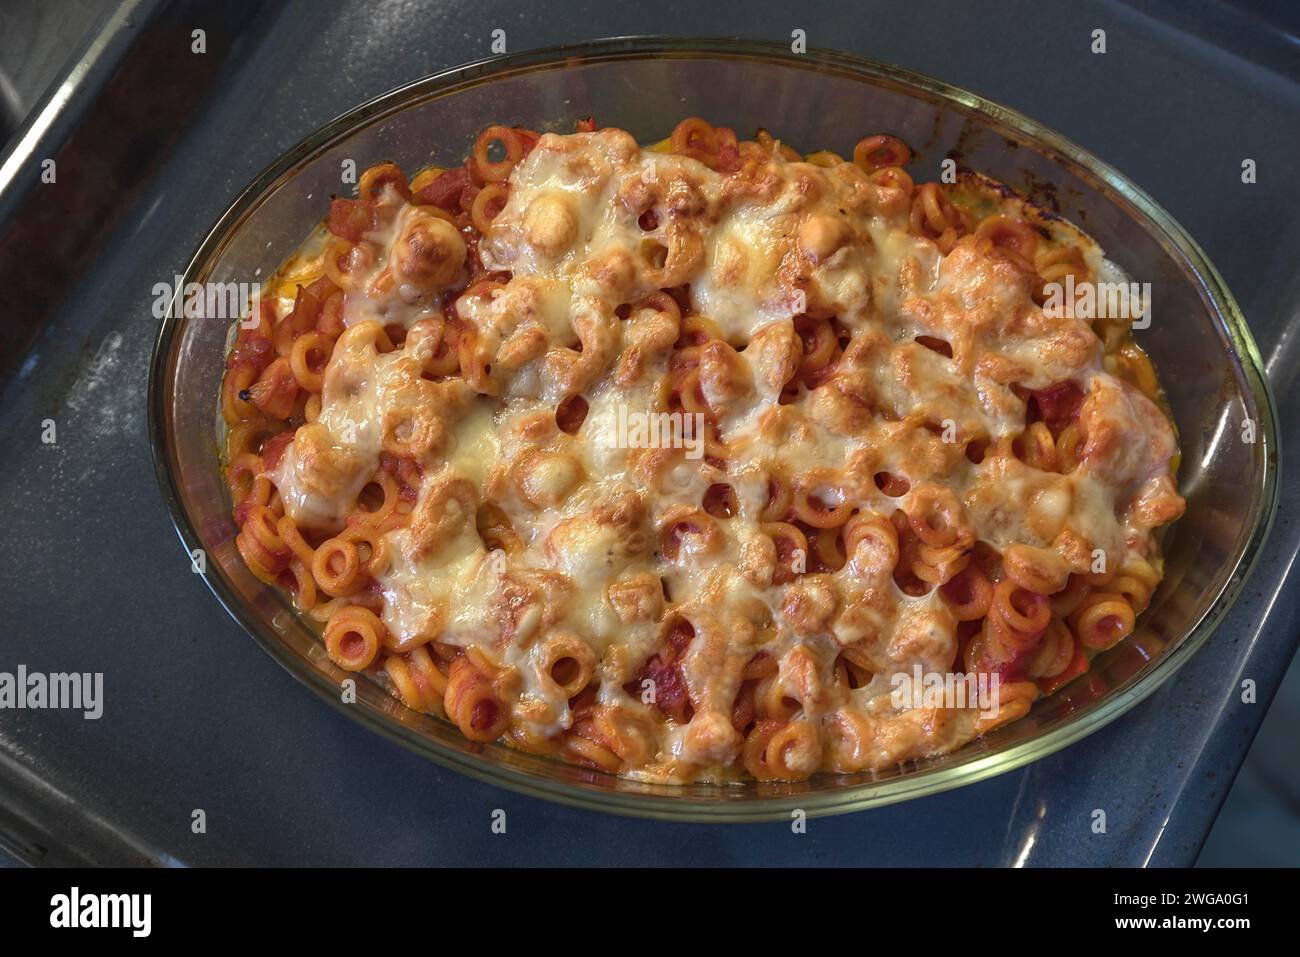 Pasta with tomatoes and cheese baked in a casserole dish in the oven, Franconia, Bavaria, Germany Stock Photo